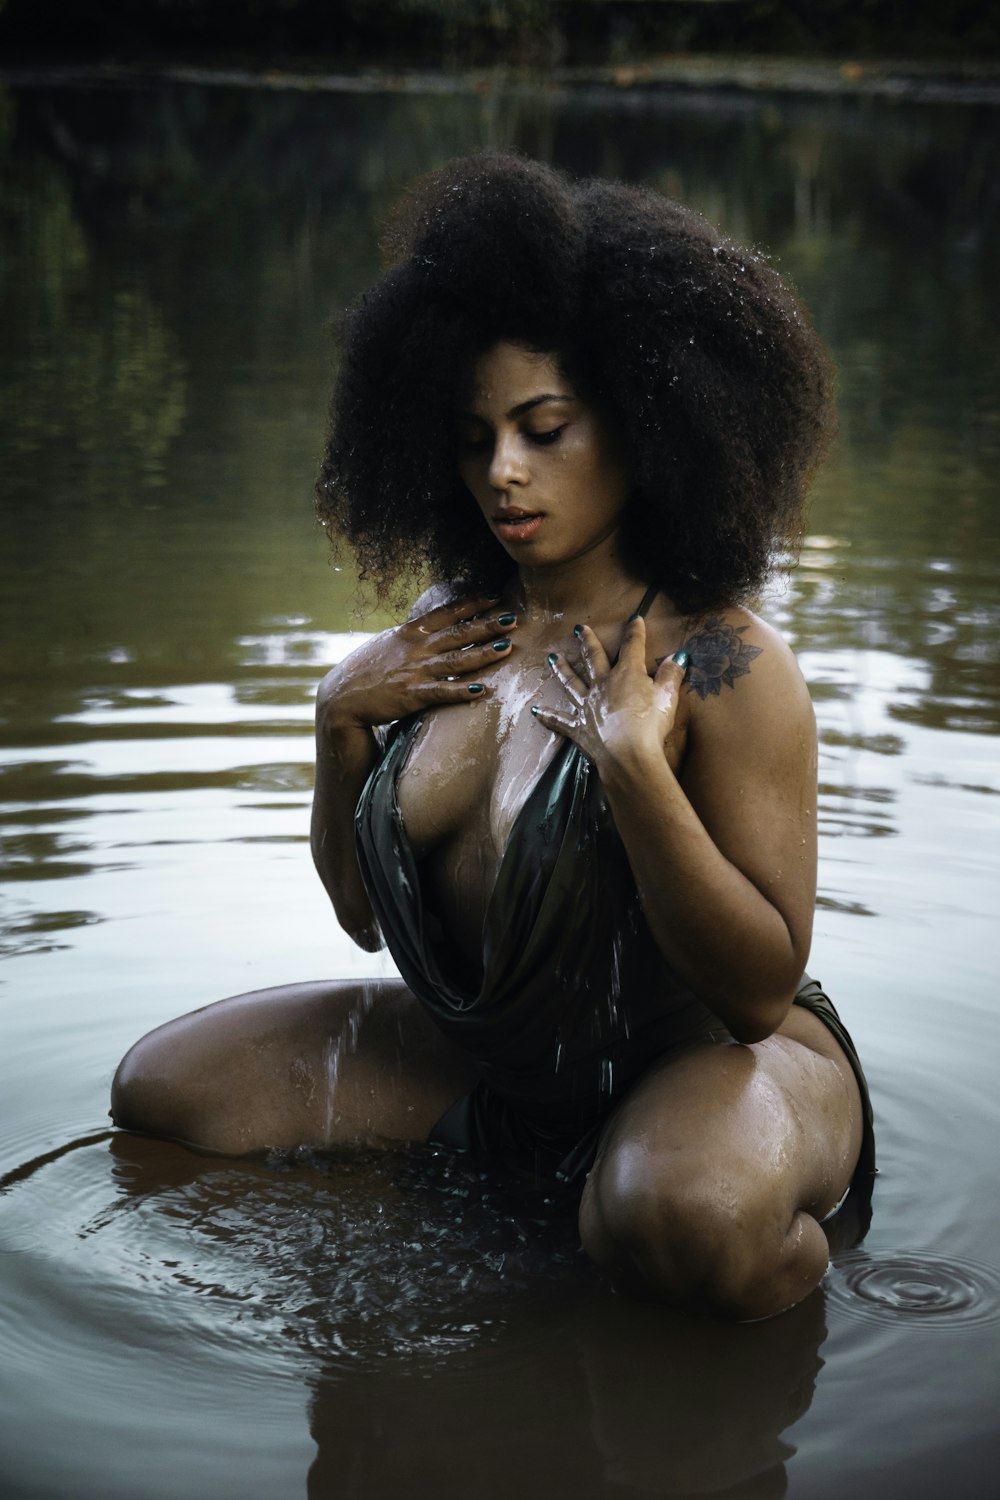 A woman sitting in the water with her hands on her chest photo